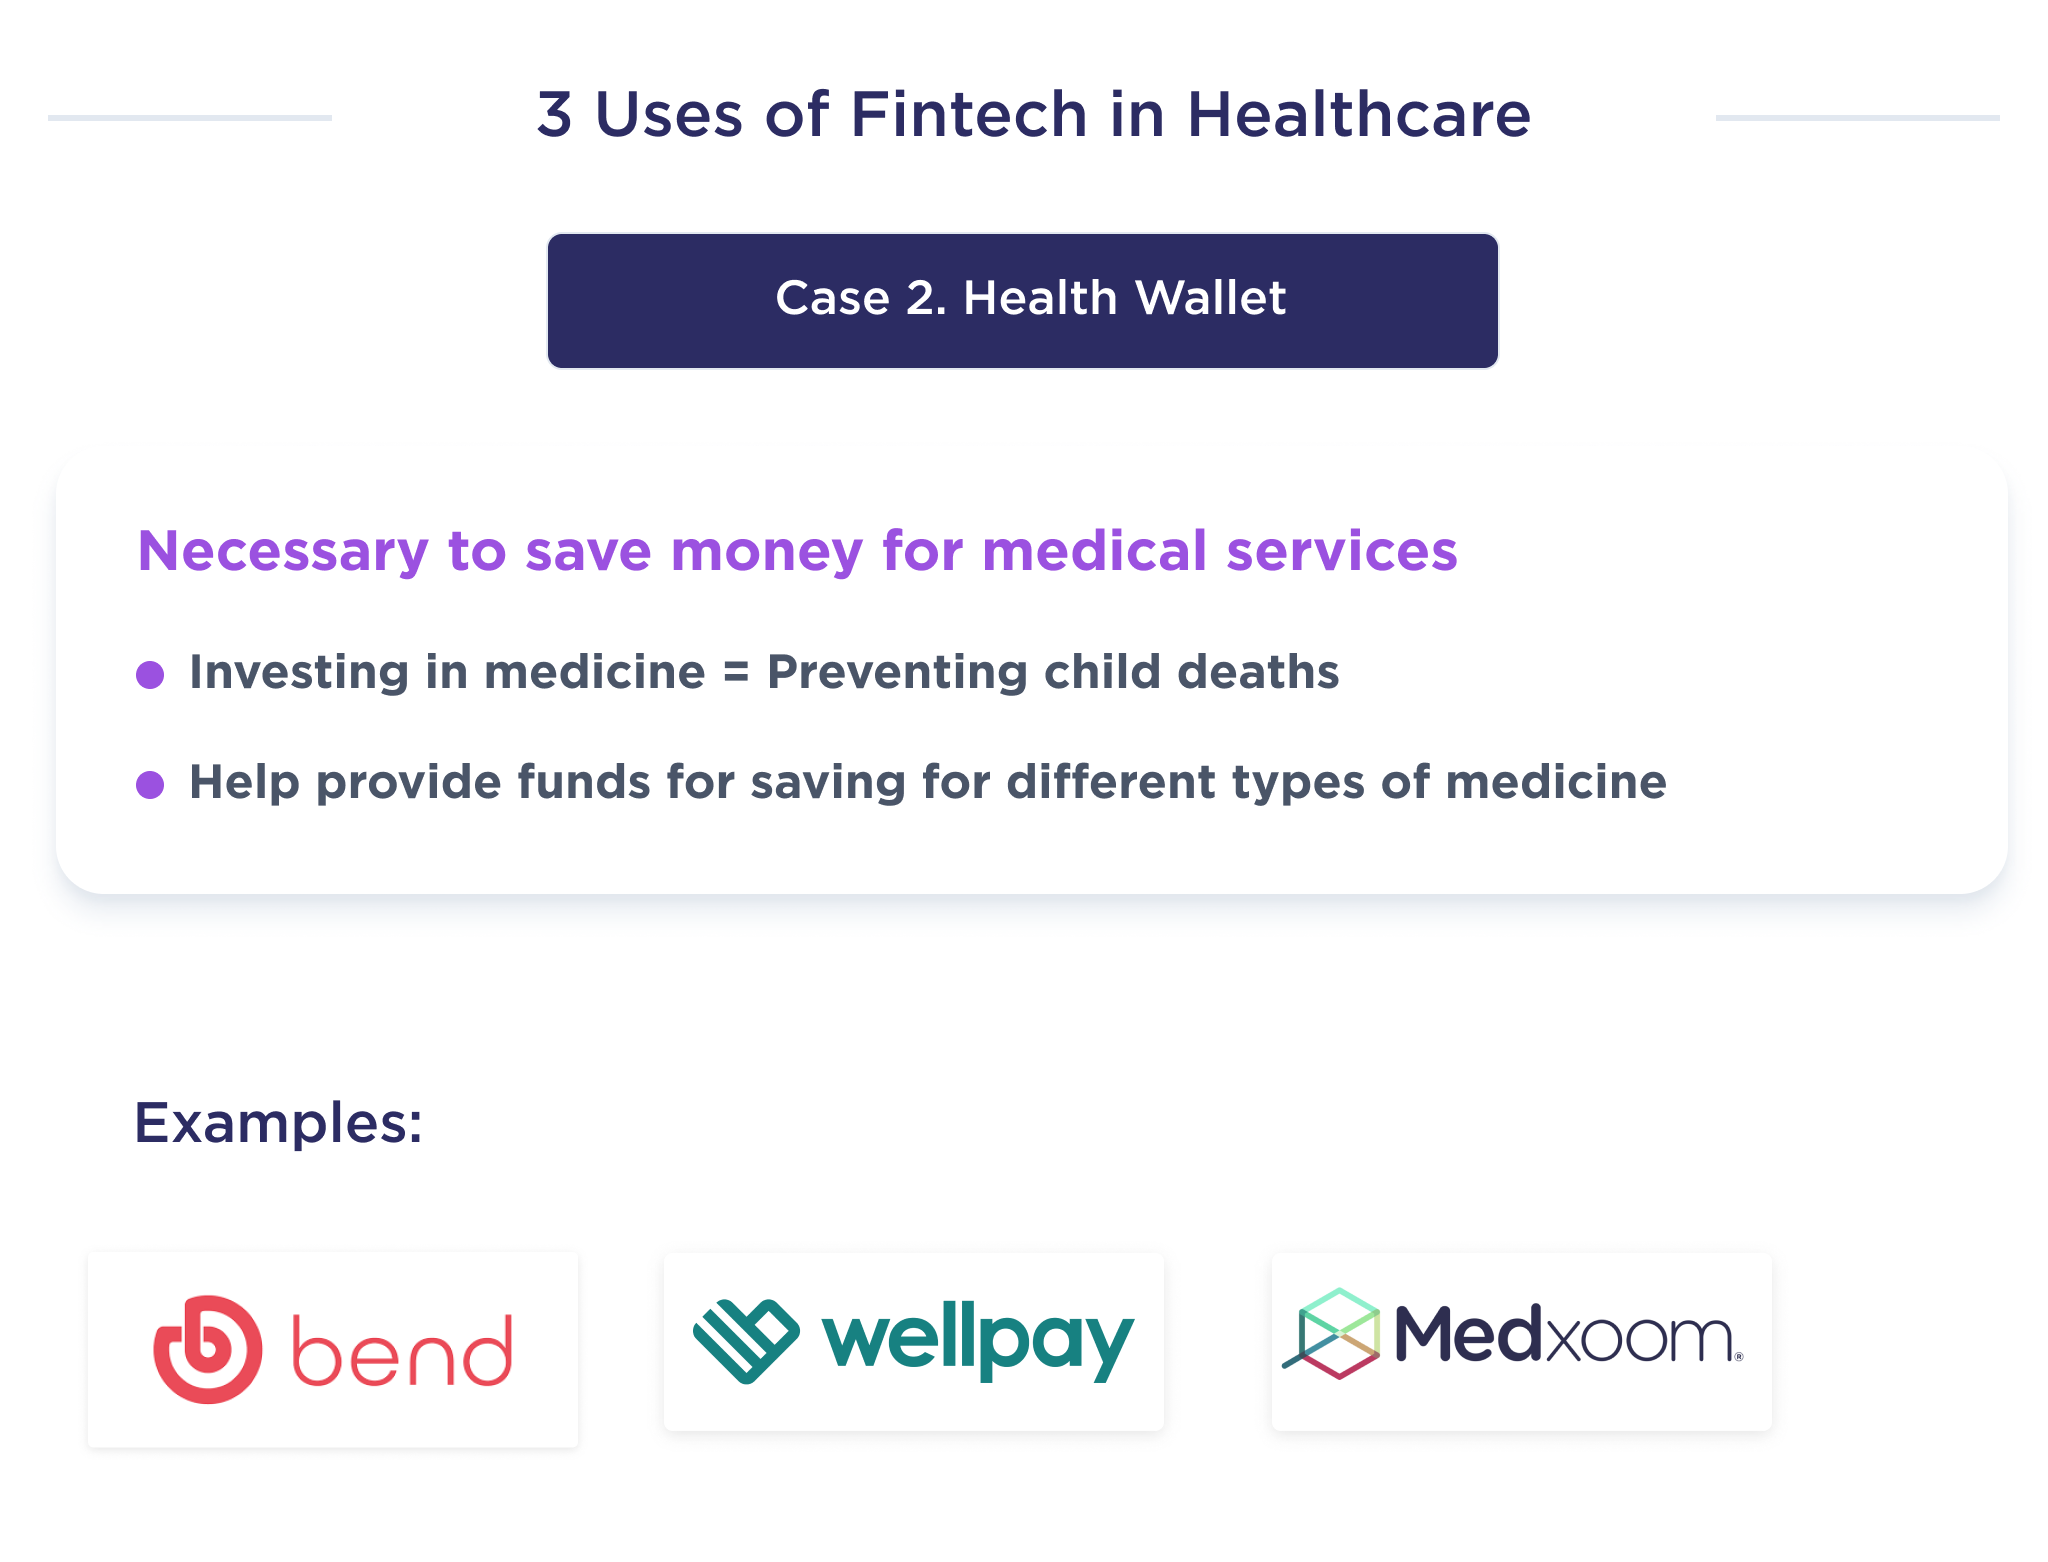 The illustration shows the second of FinTech's uses in health care, which describes the health wallet